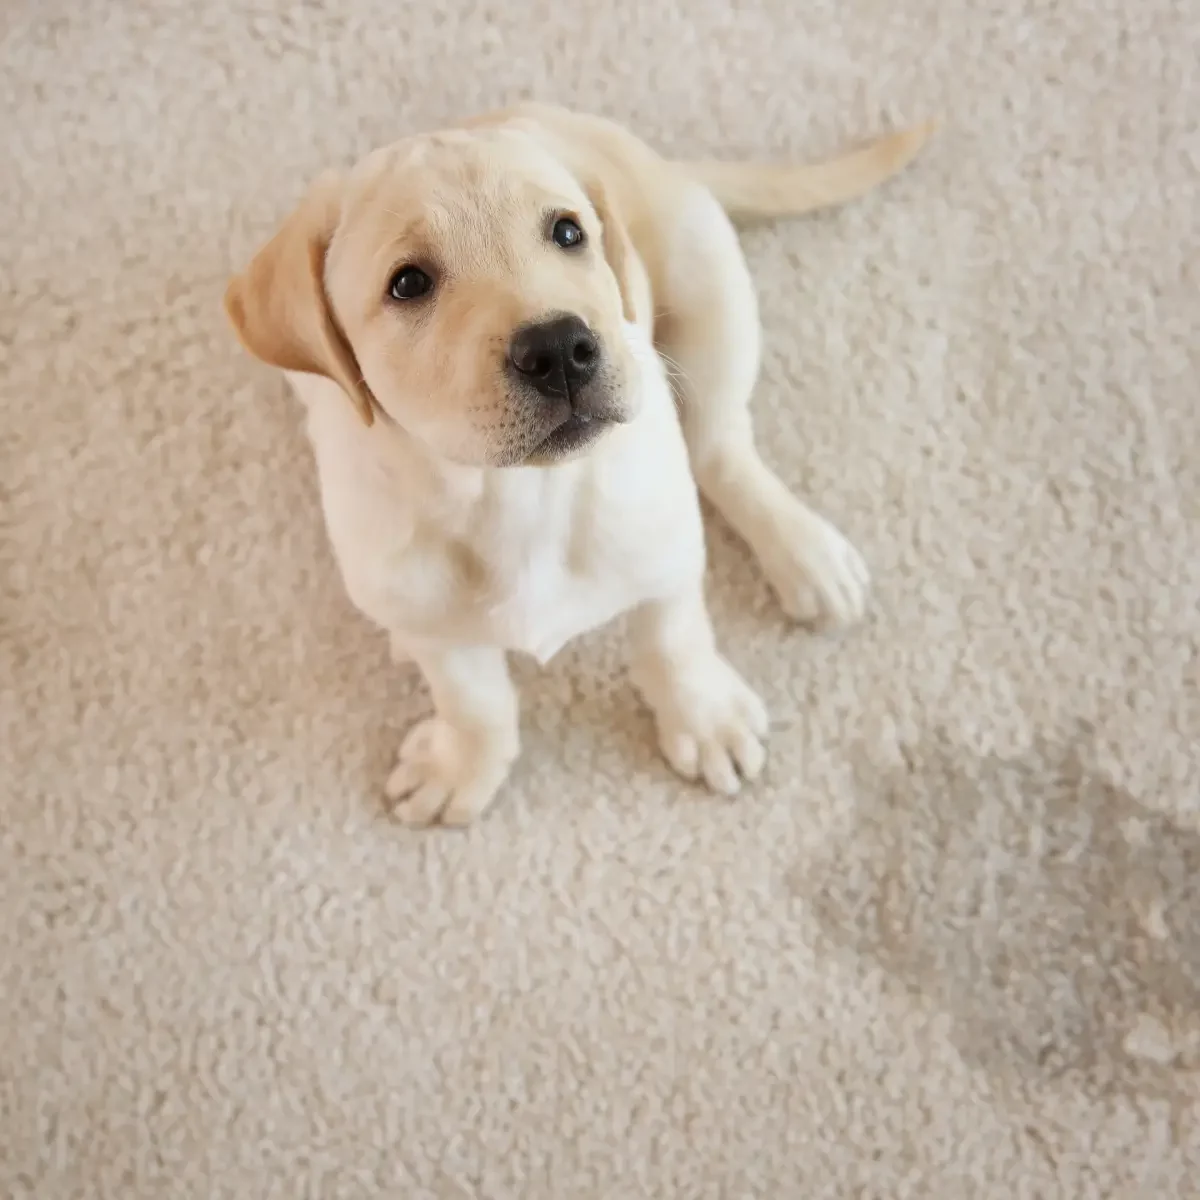 carpet-cleaning-services-stains-salt-lake-county-utah